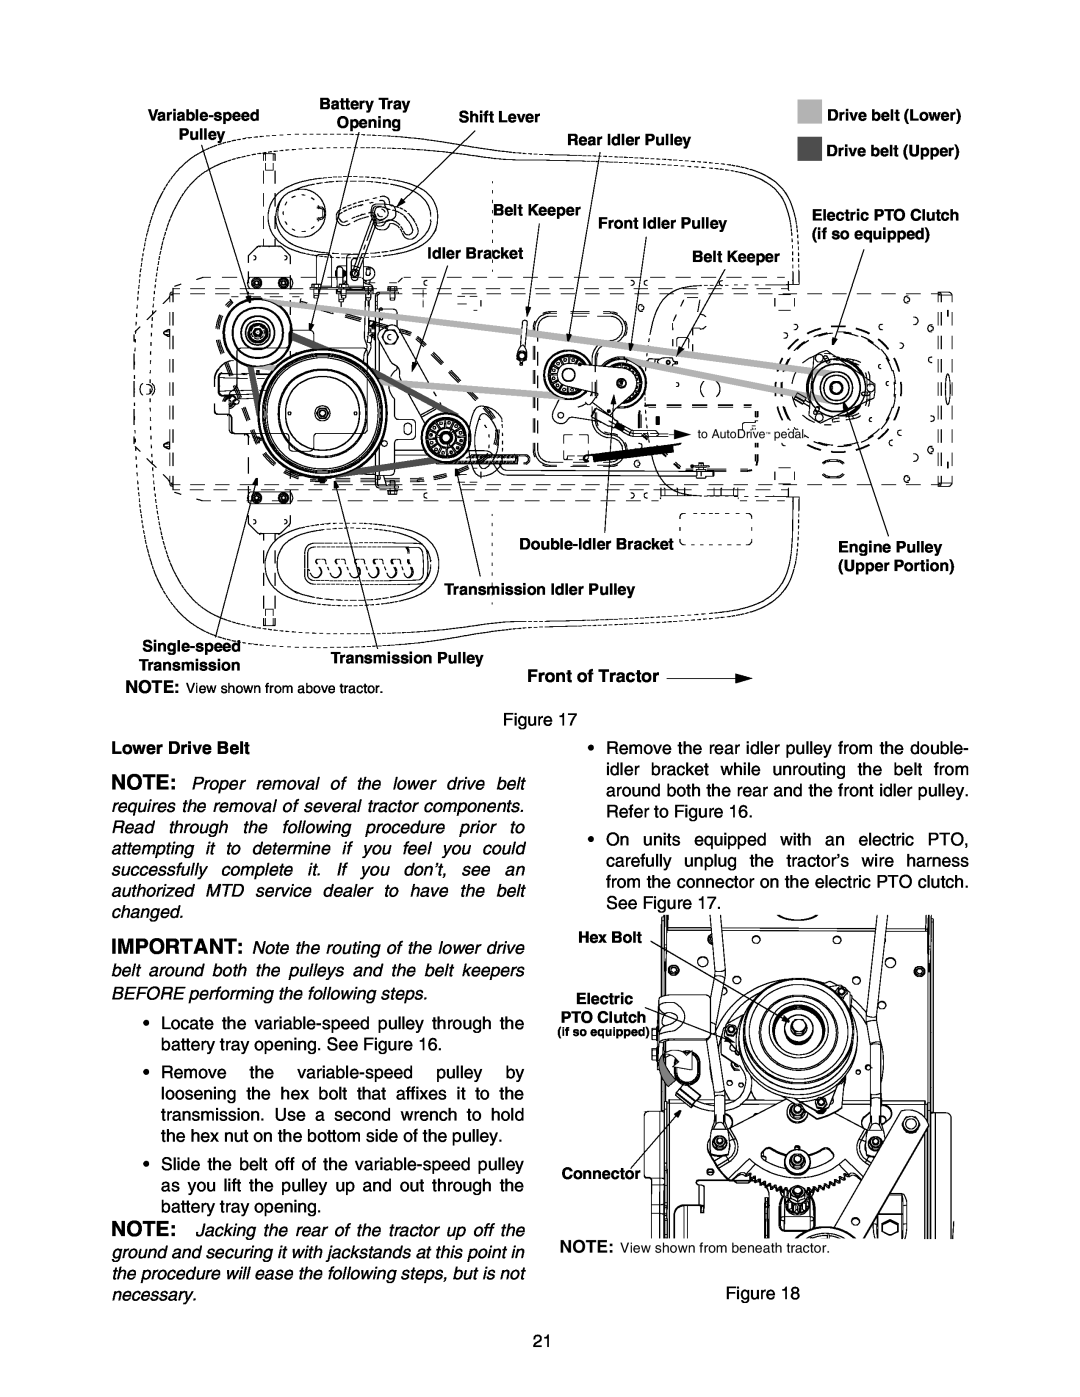 Yard-Man 604 manual Front of Tractor, Lower Drive Belt 